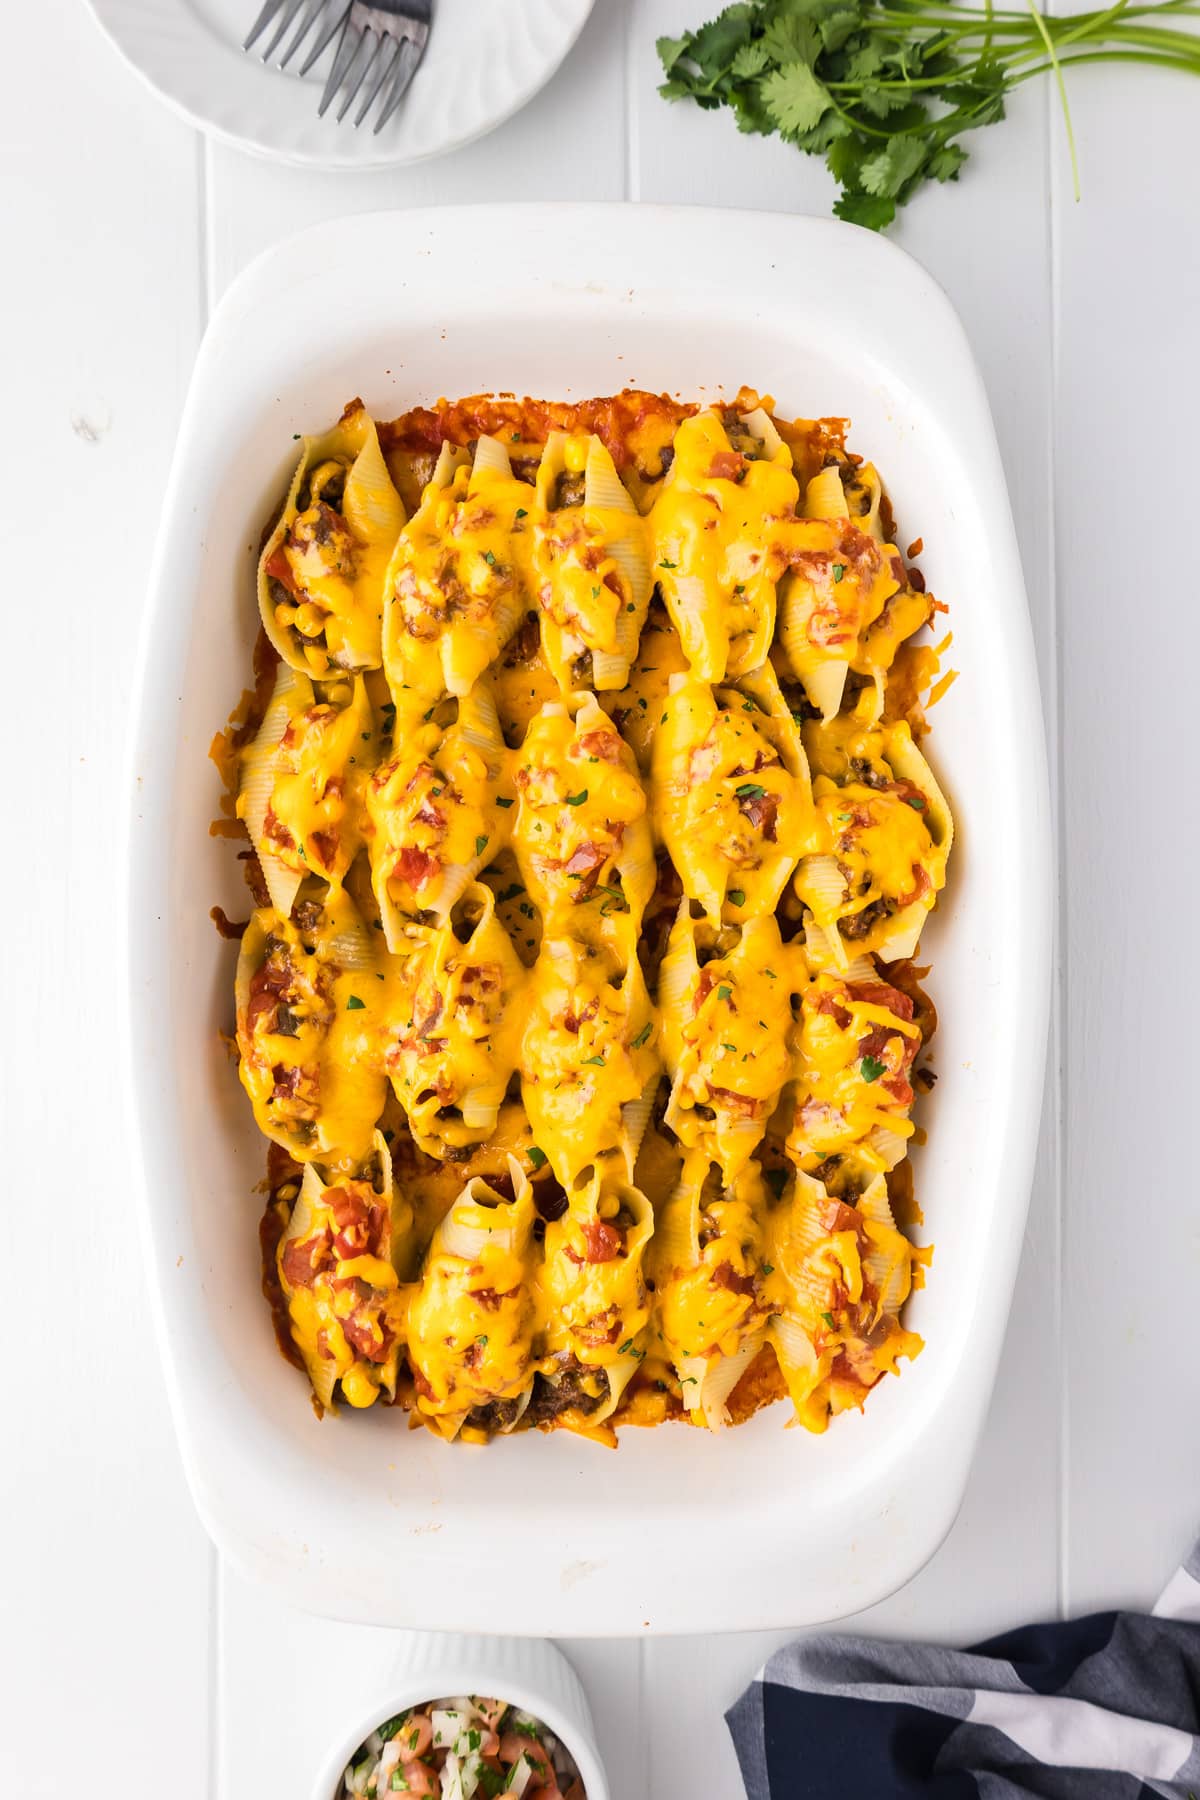 Taco stuffed shells lined up in a casserole dish with melted cheese on top.